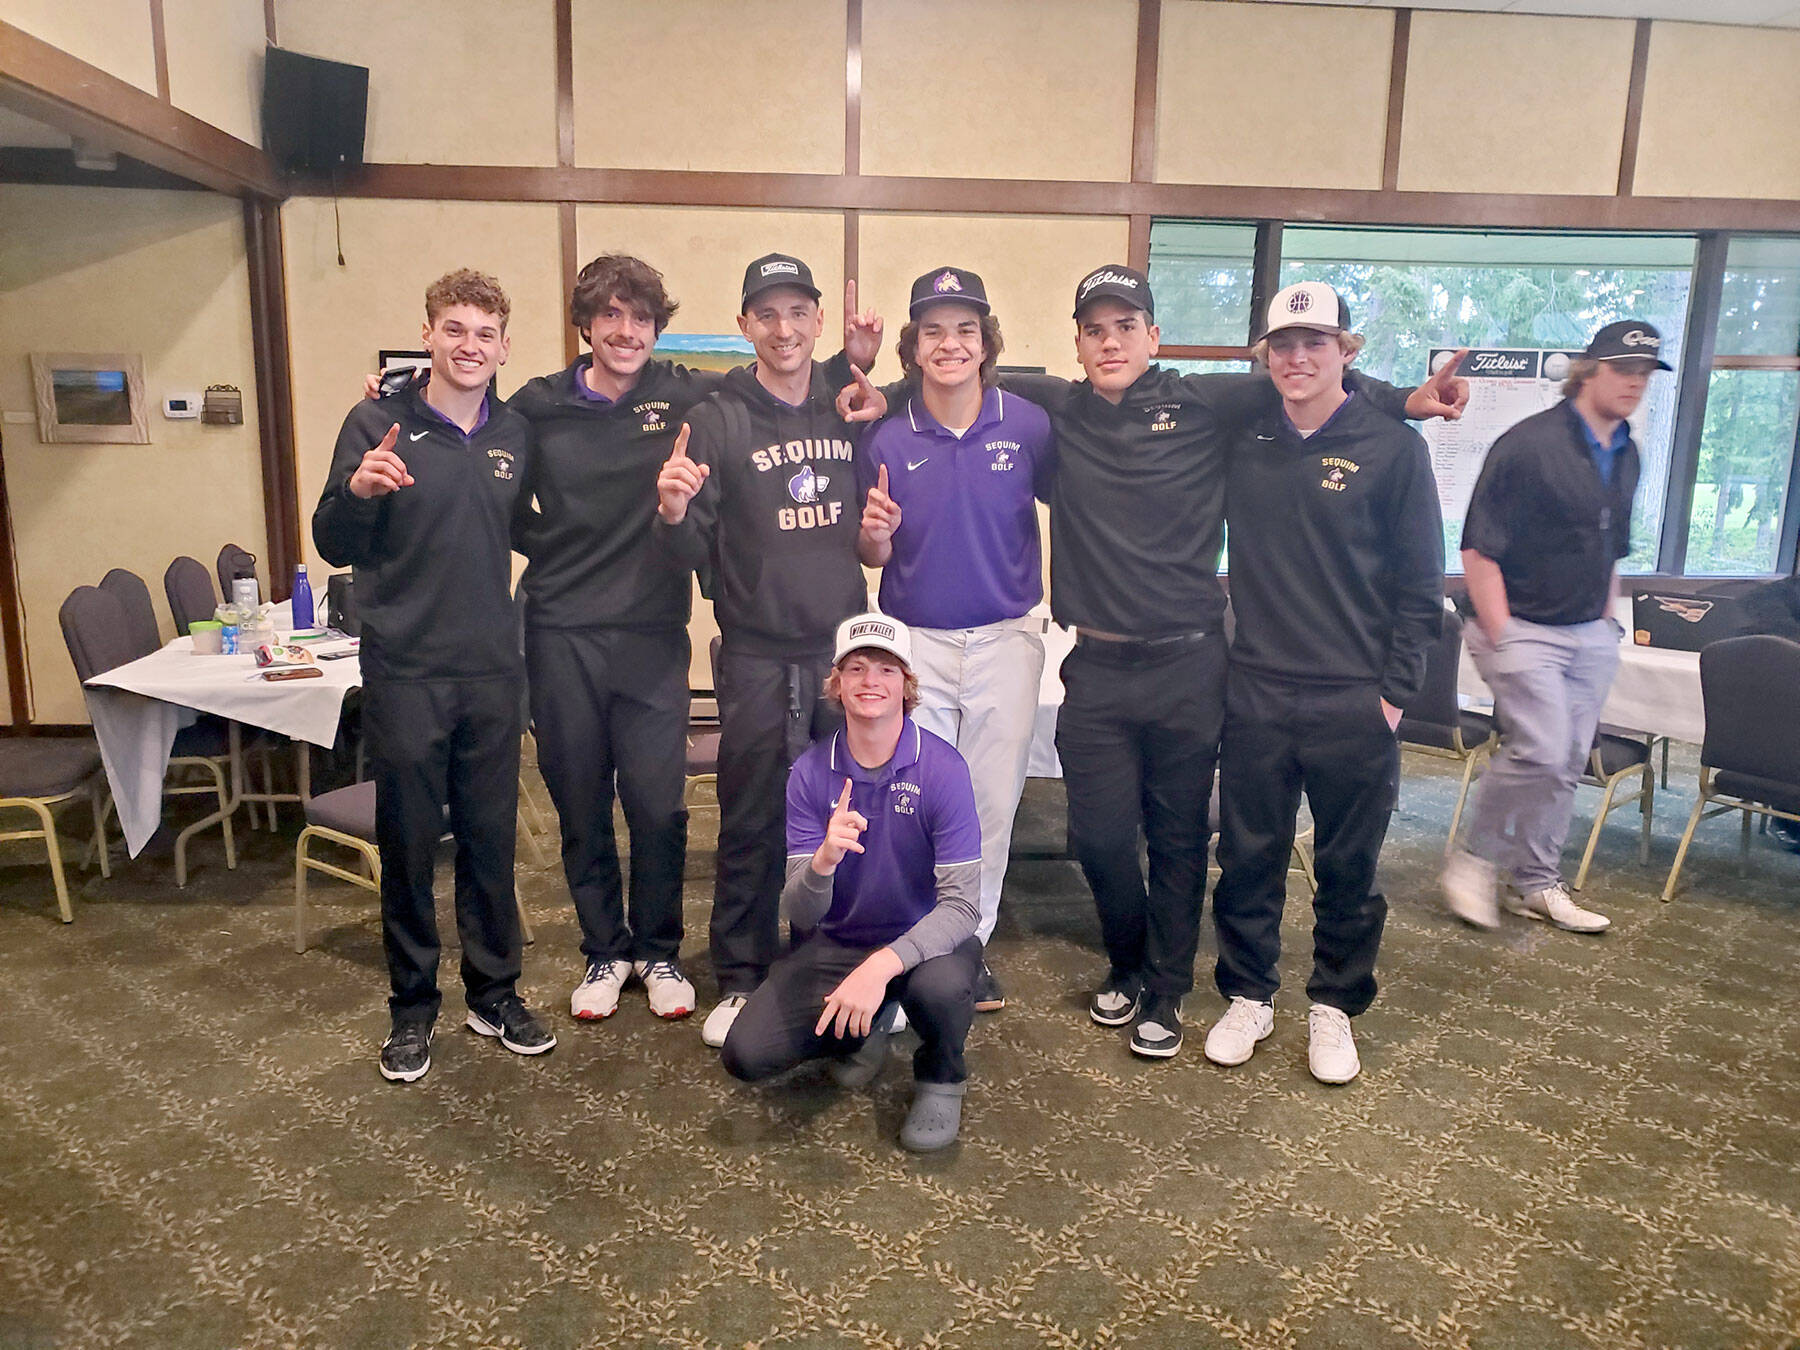 The Sequim boys golf team earned a 19-stroke victory in the Olympic League Boys Golf Championships held Monday at Kitsap Golf & Country Club. Sequim’s Ben Sweet (kneeling) won the individual league title by one stroke over teammate Dominic Riccobene, far left. The Wolves also finished the Olympic League regular season with an undefeated record. Team members are, from left, Riccobene, Cole Smithson, Coach Sean O’Mera, Lars Wiker, Pryce Glasser, Zackary Thompson and Sweet.